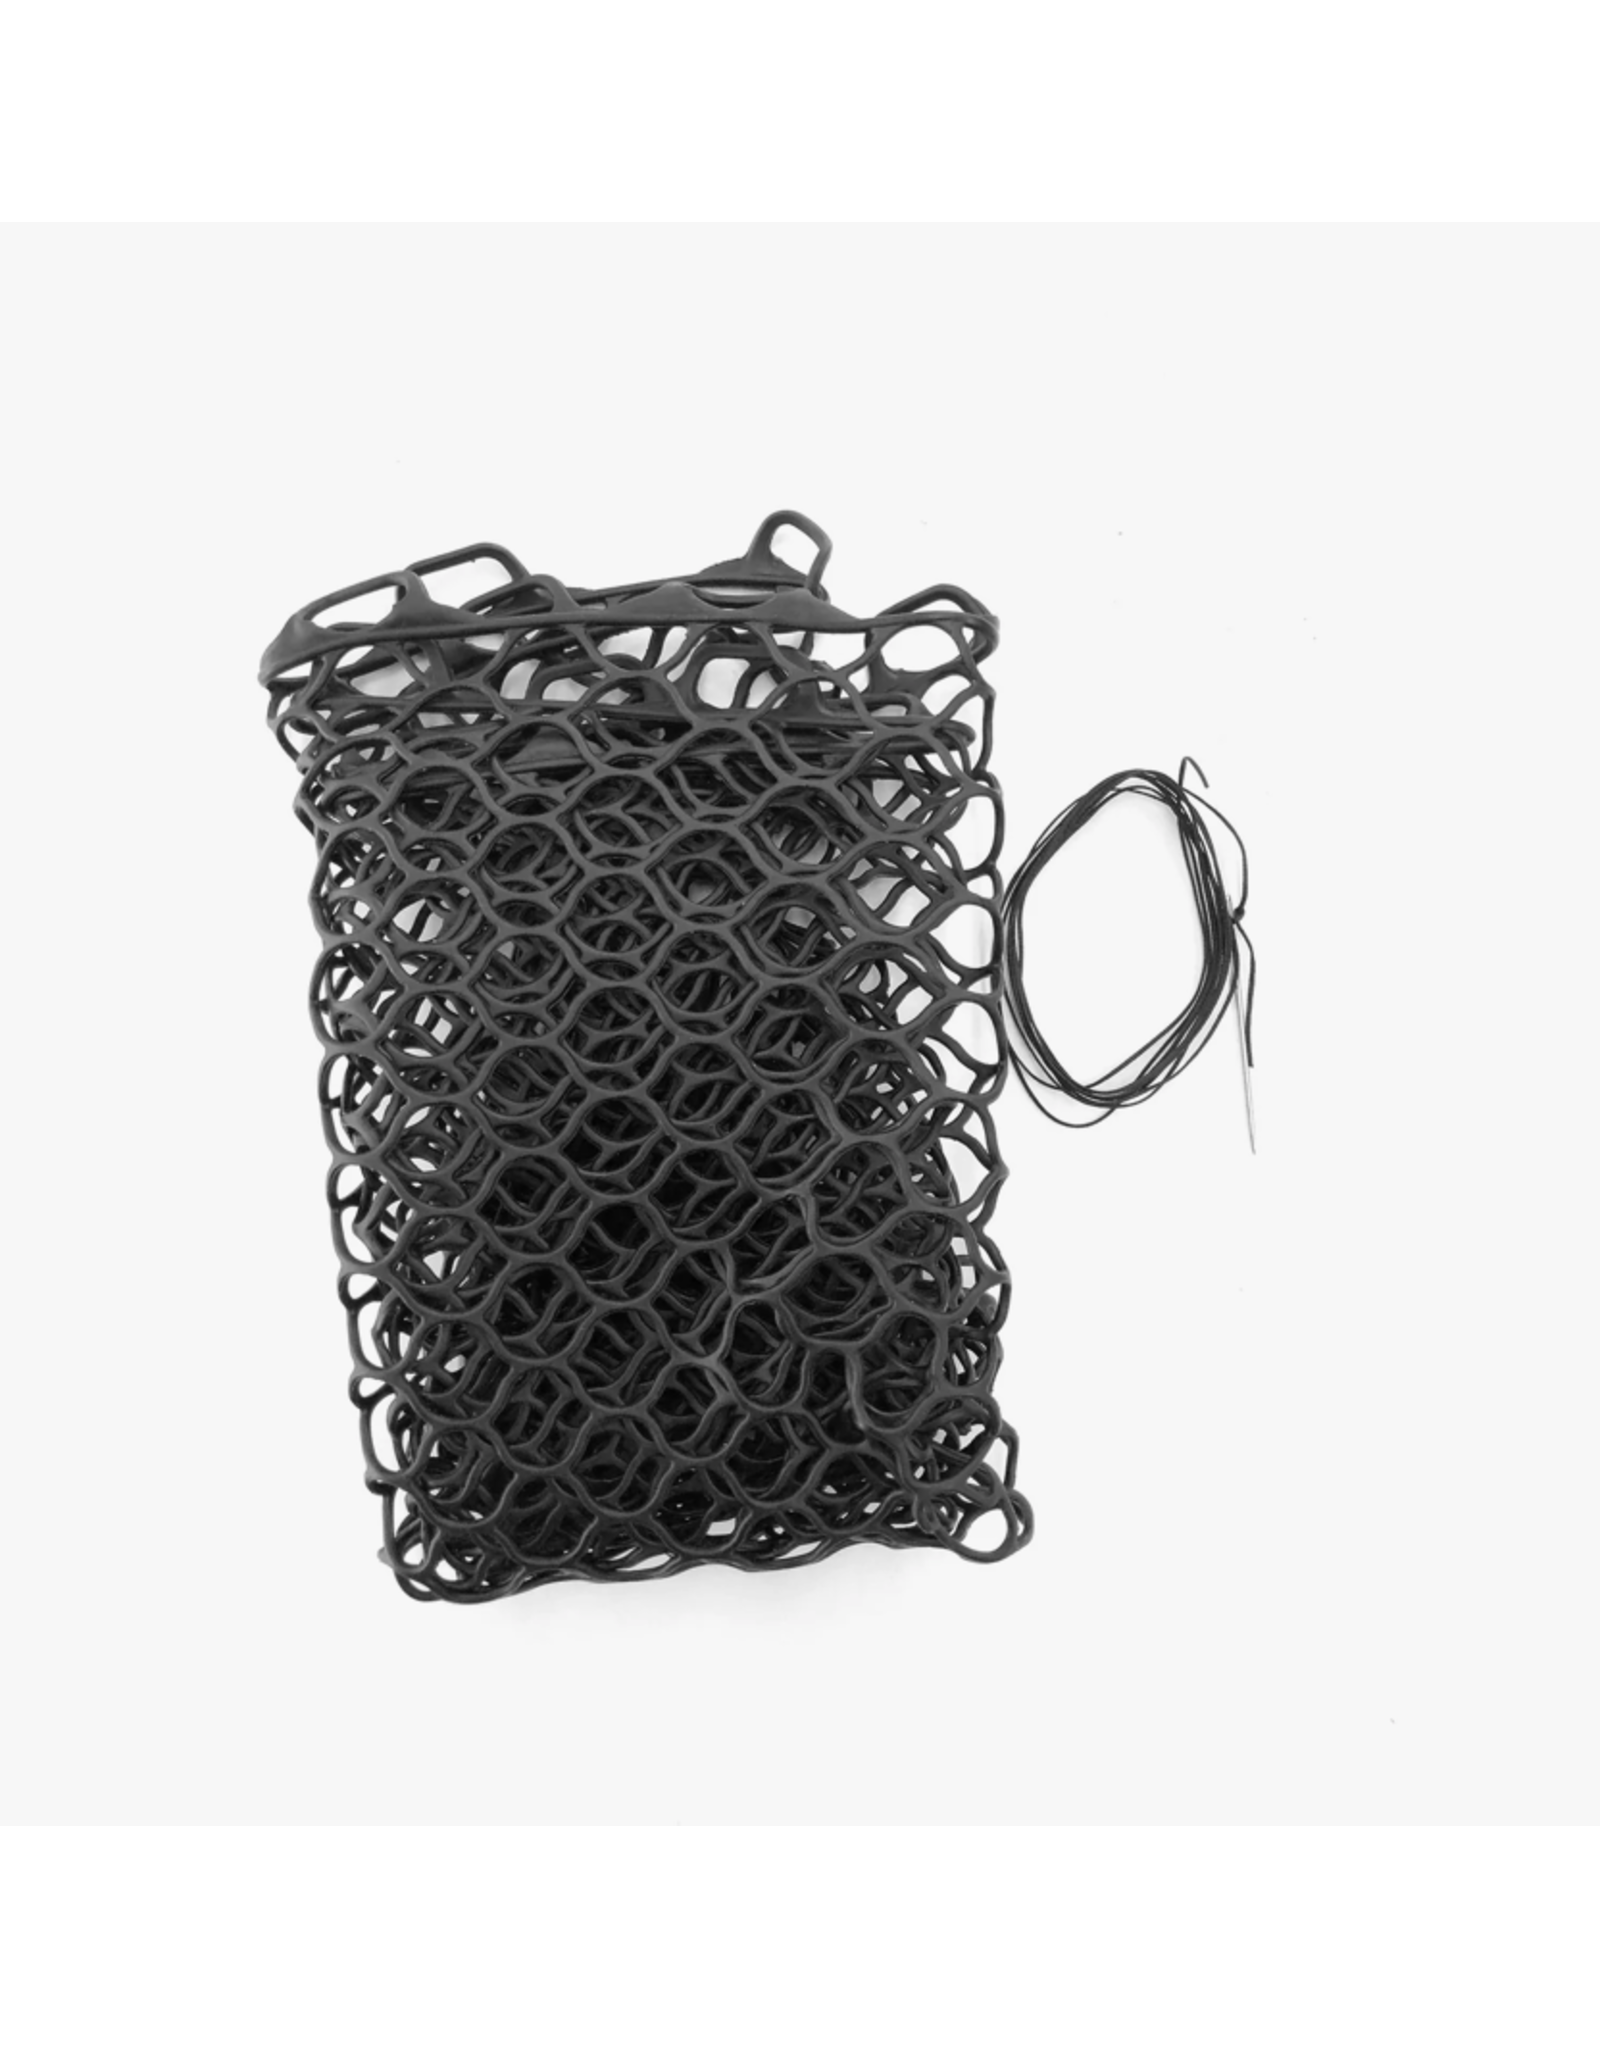 Fishpond Fishpond - Nomad Replacement Rubber Net - 15"